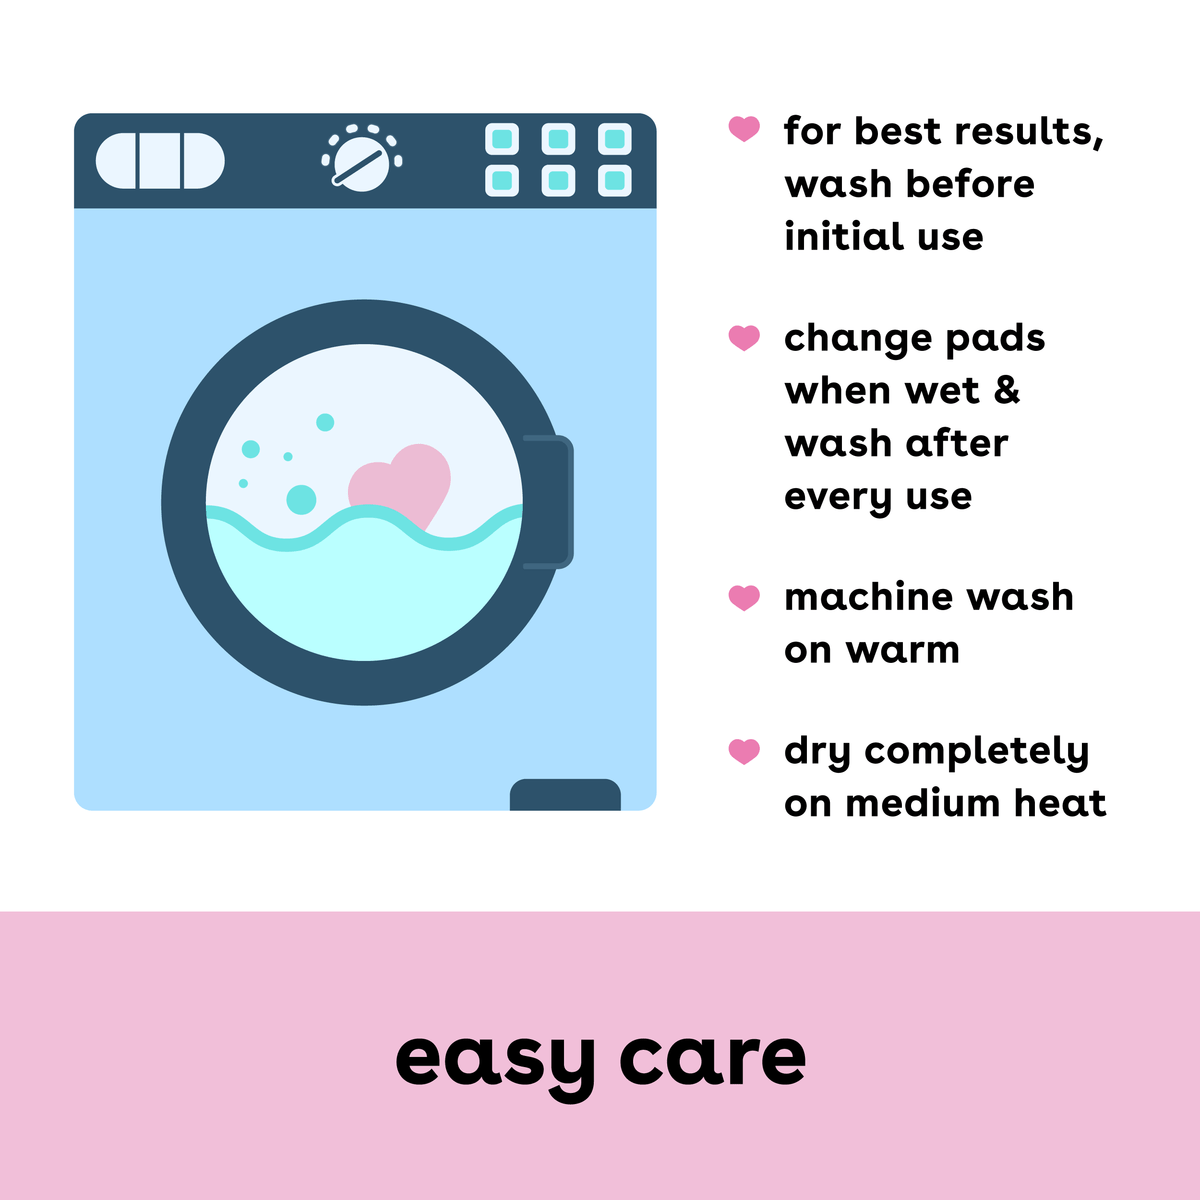 Washing instructions for your washable nursing pads